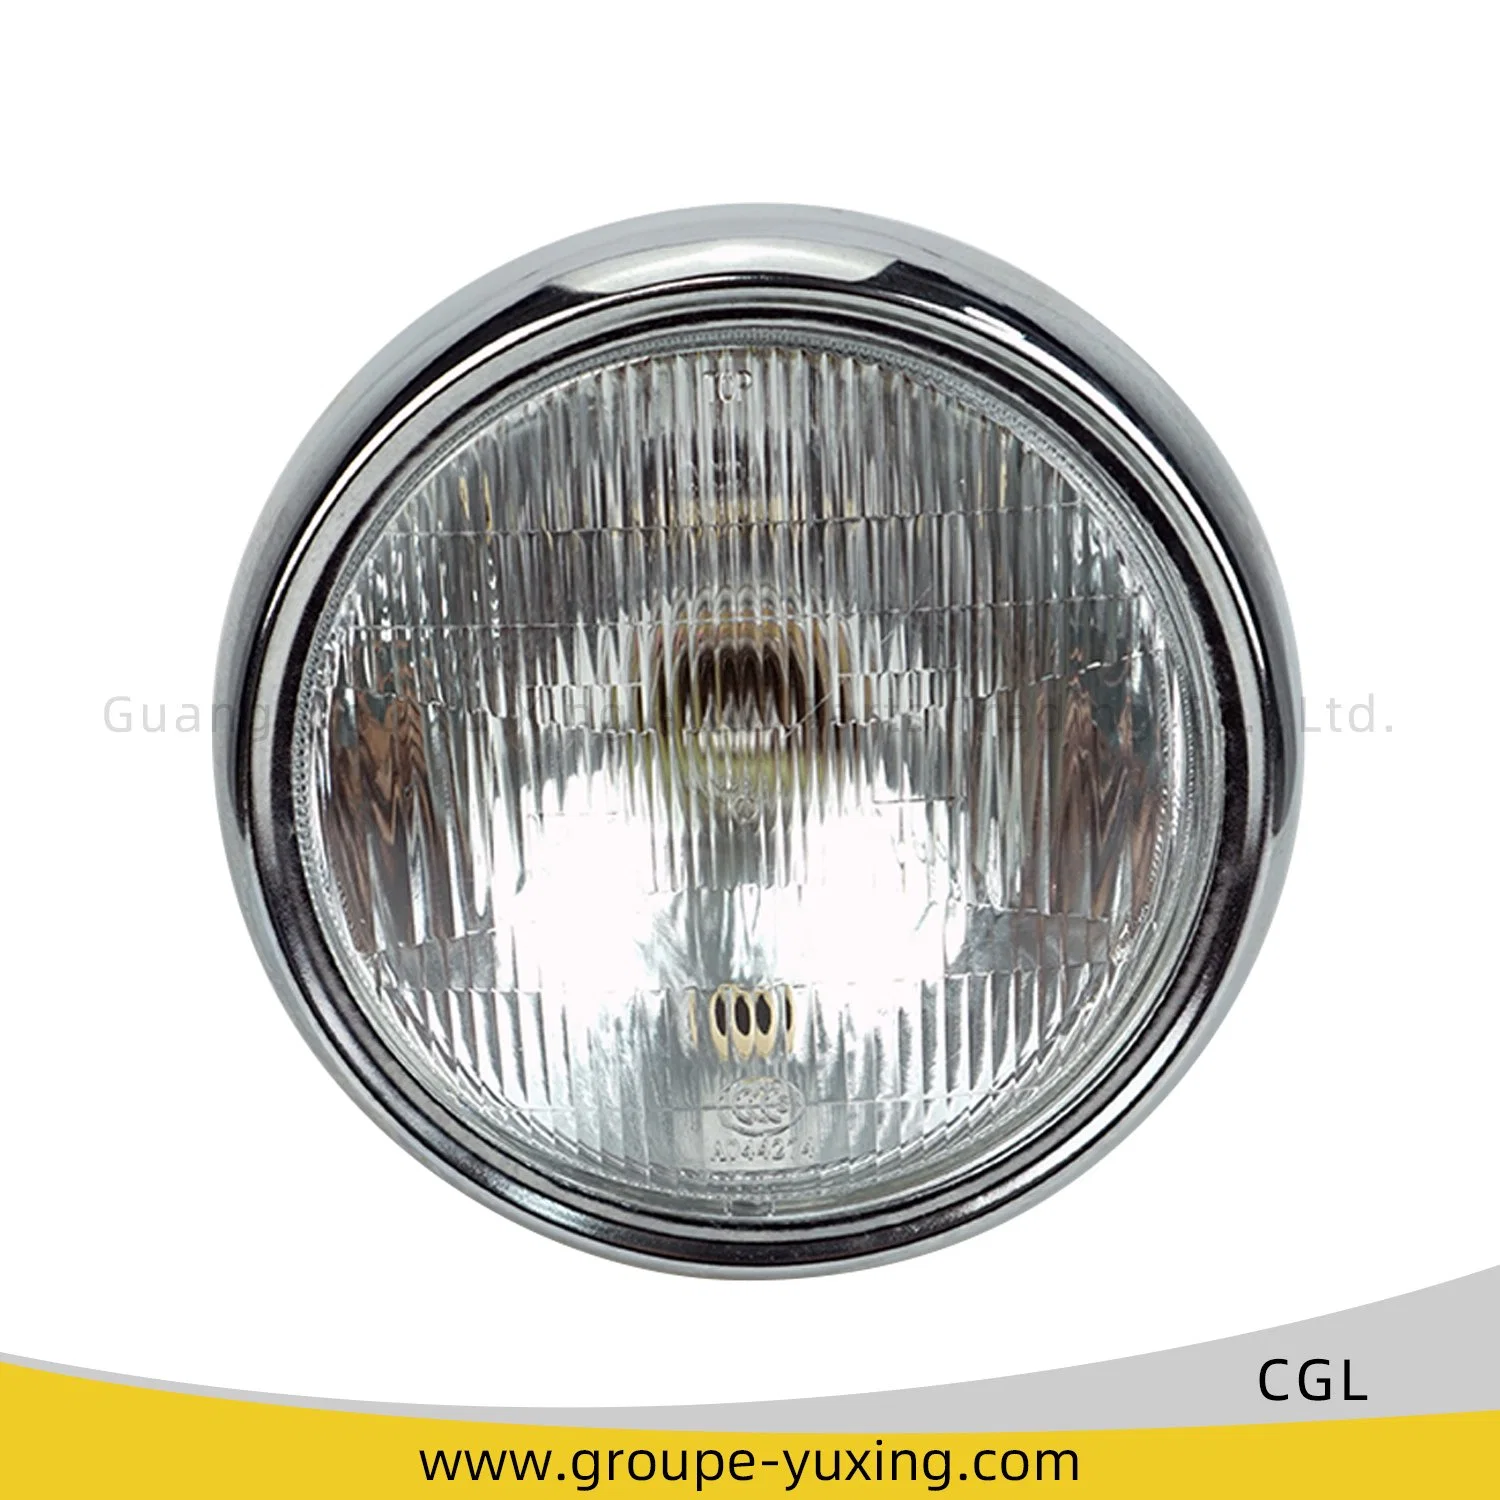 Motorcycle Spare Parts Motorcycle Head Light for Cgl